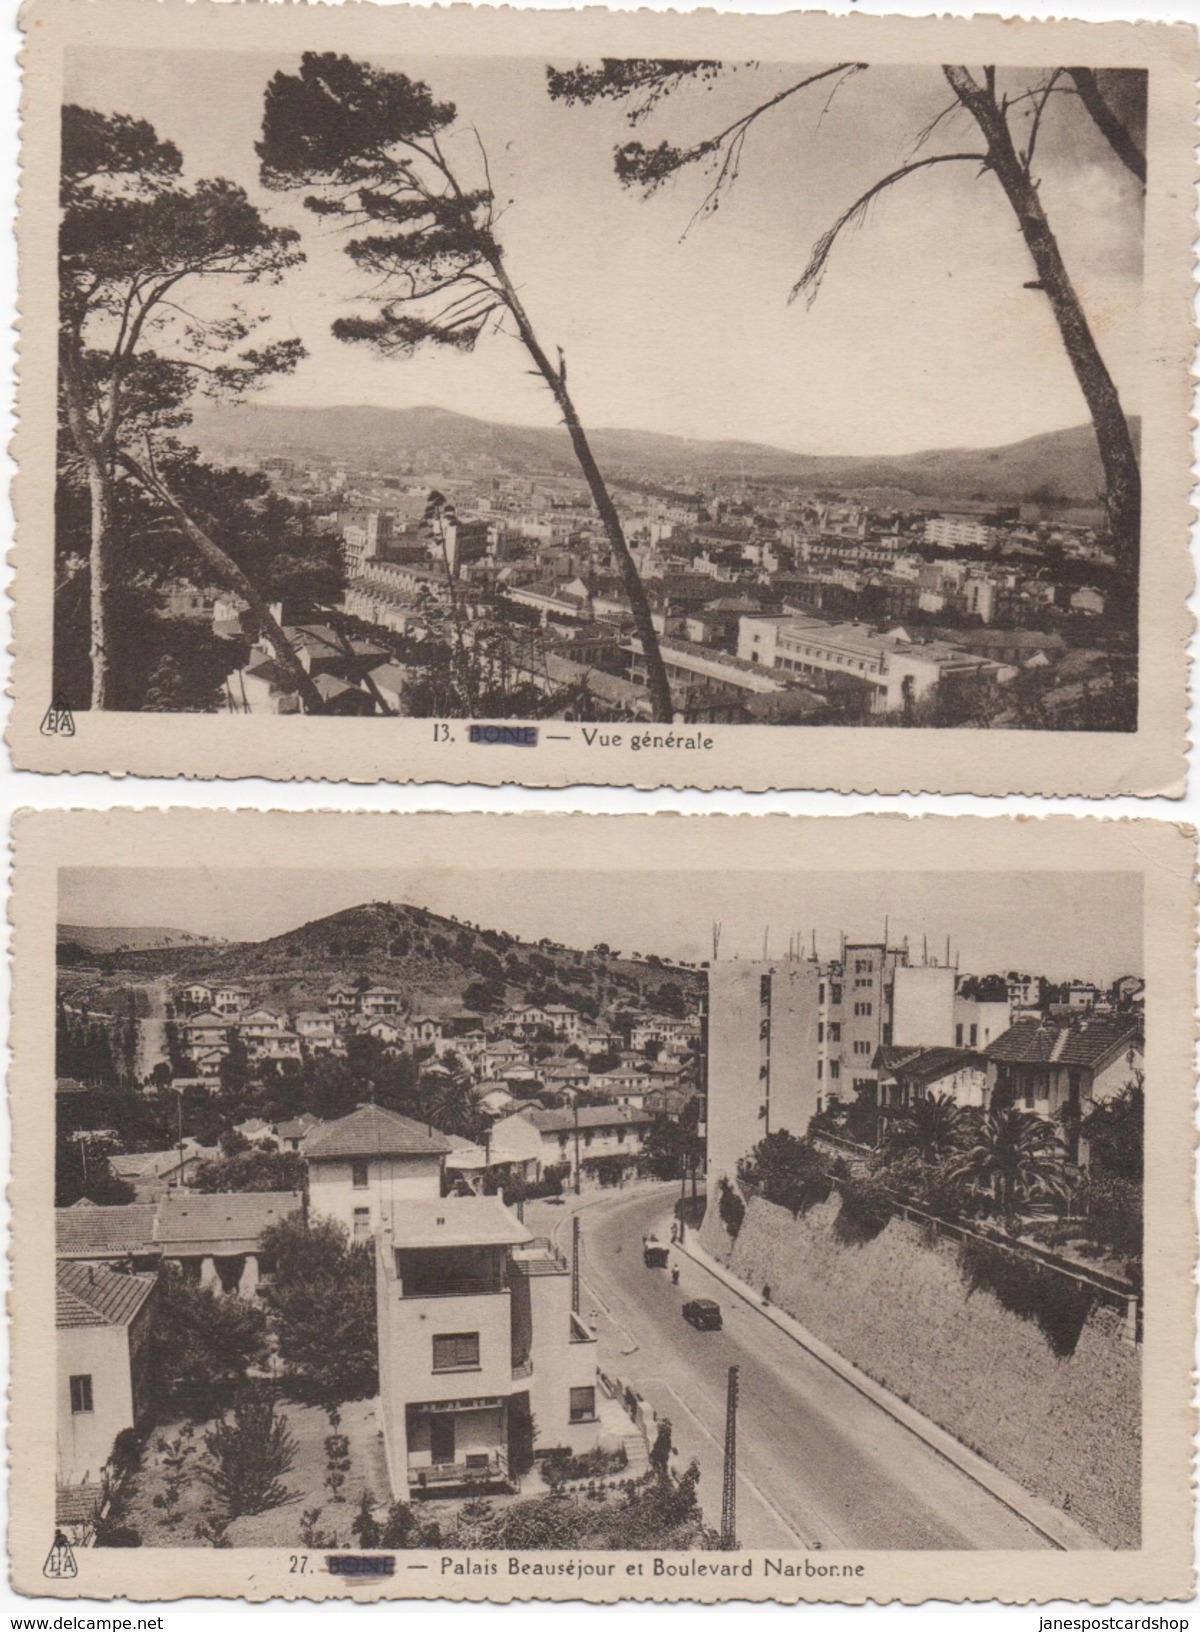 TWO POSTCARDS - BONE - FRENCH NORTH AFRICA - C1939-1945 - Unposted - Unclassified